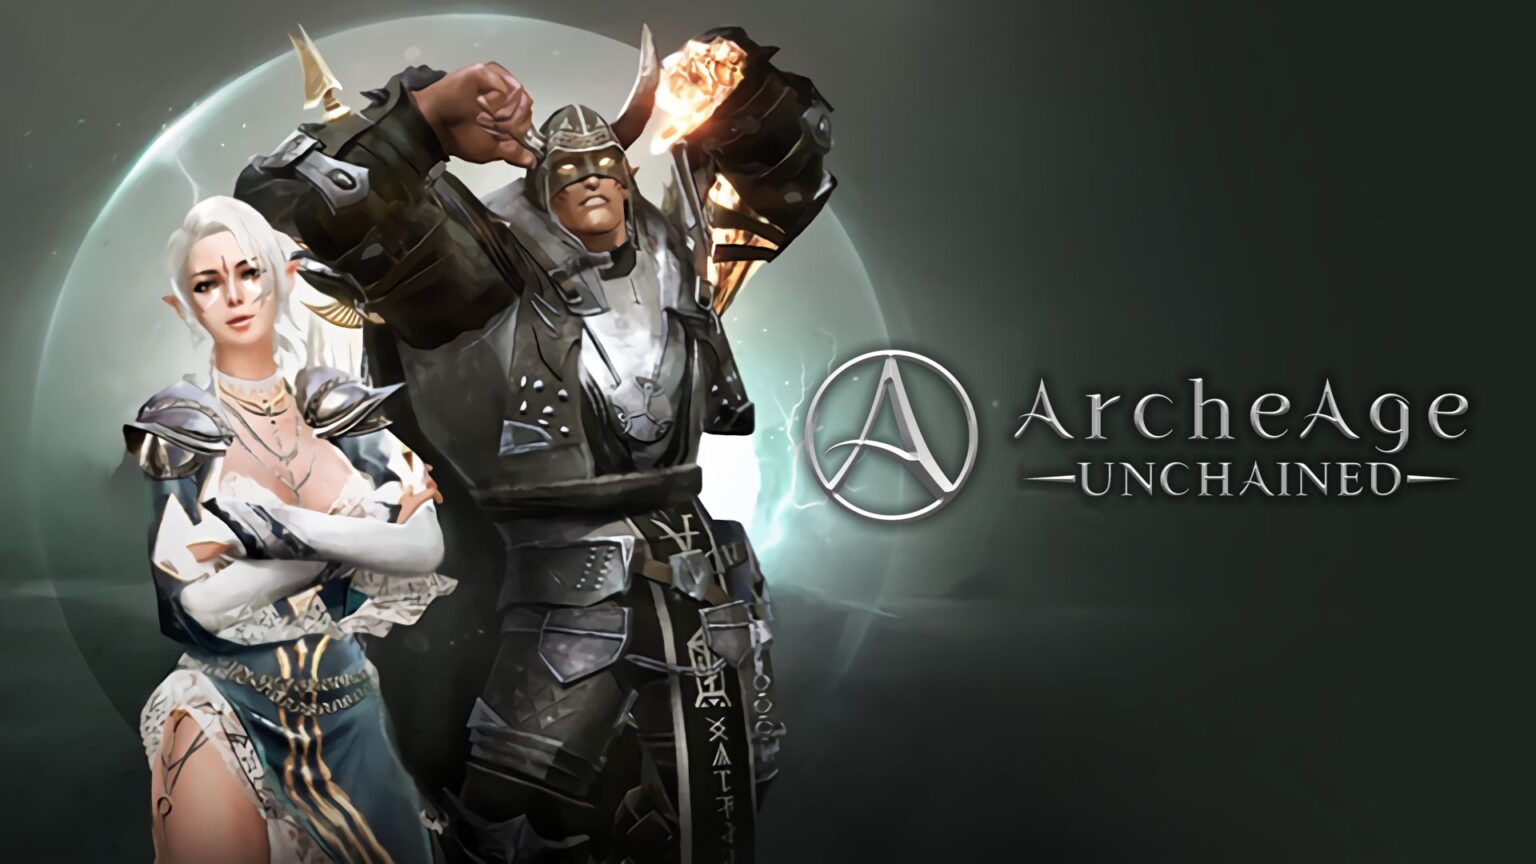 kakao games archeage unchained download